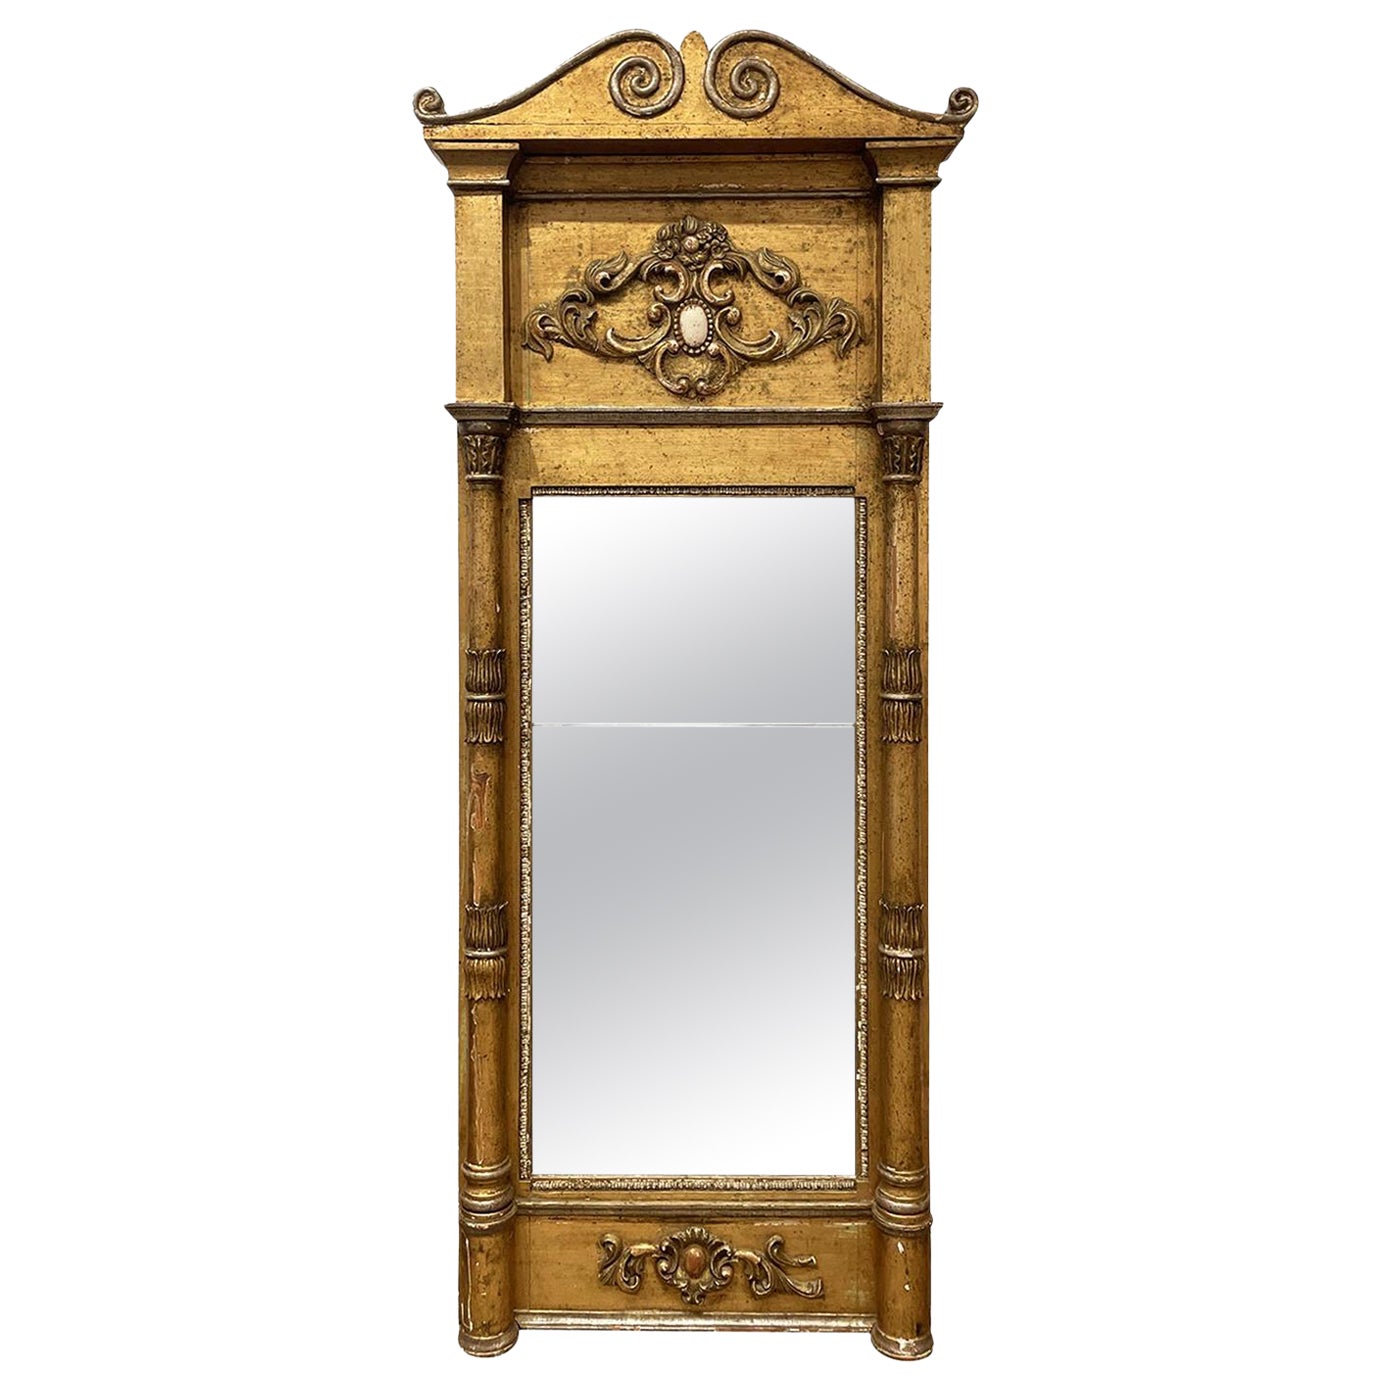 18th - 19th Century Gold French Rococo Style Gilded Pinewood Wall Glass Mirror